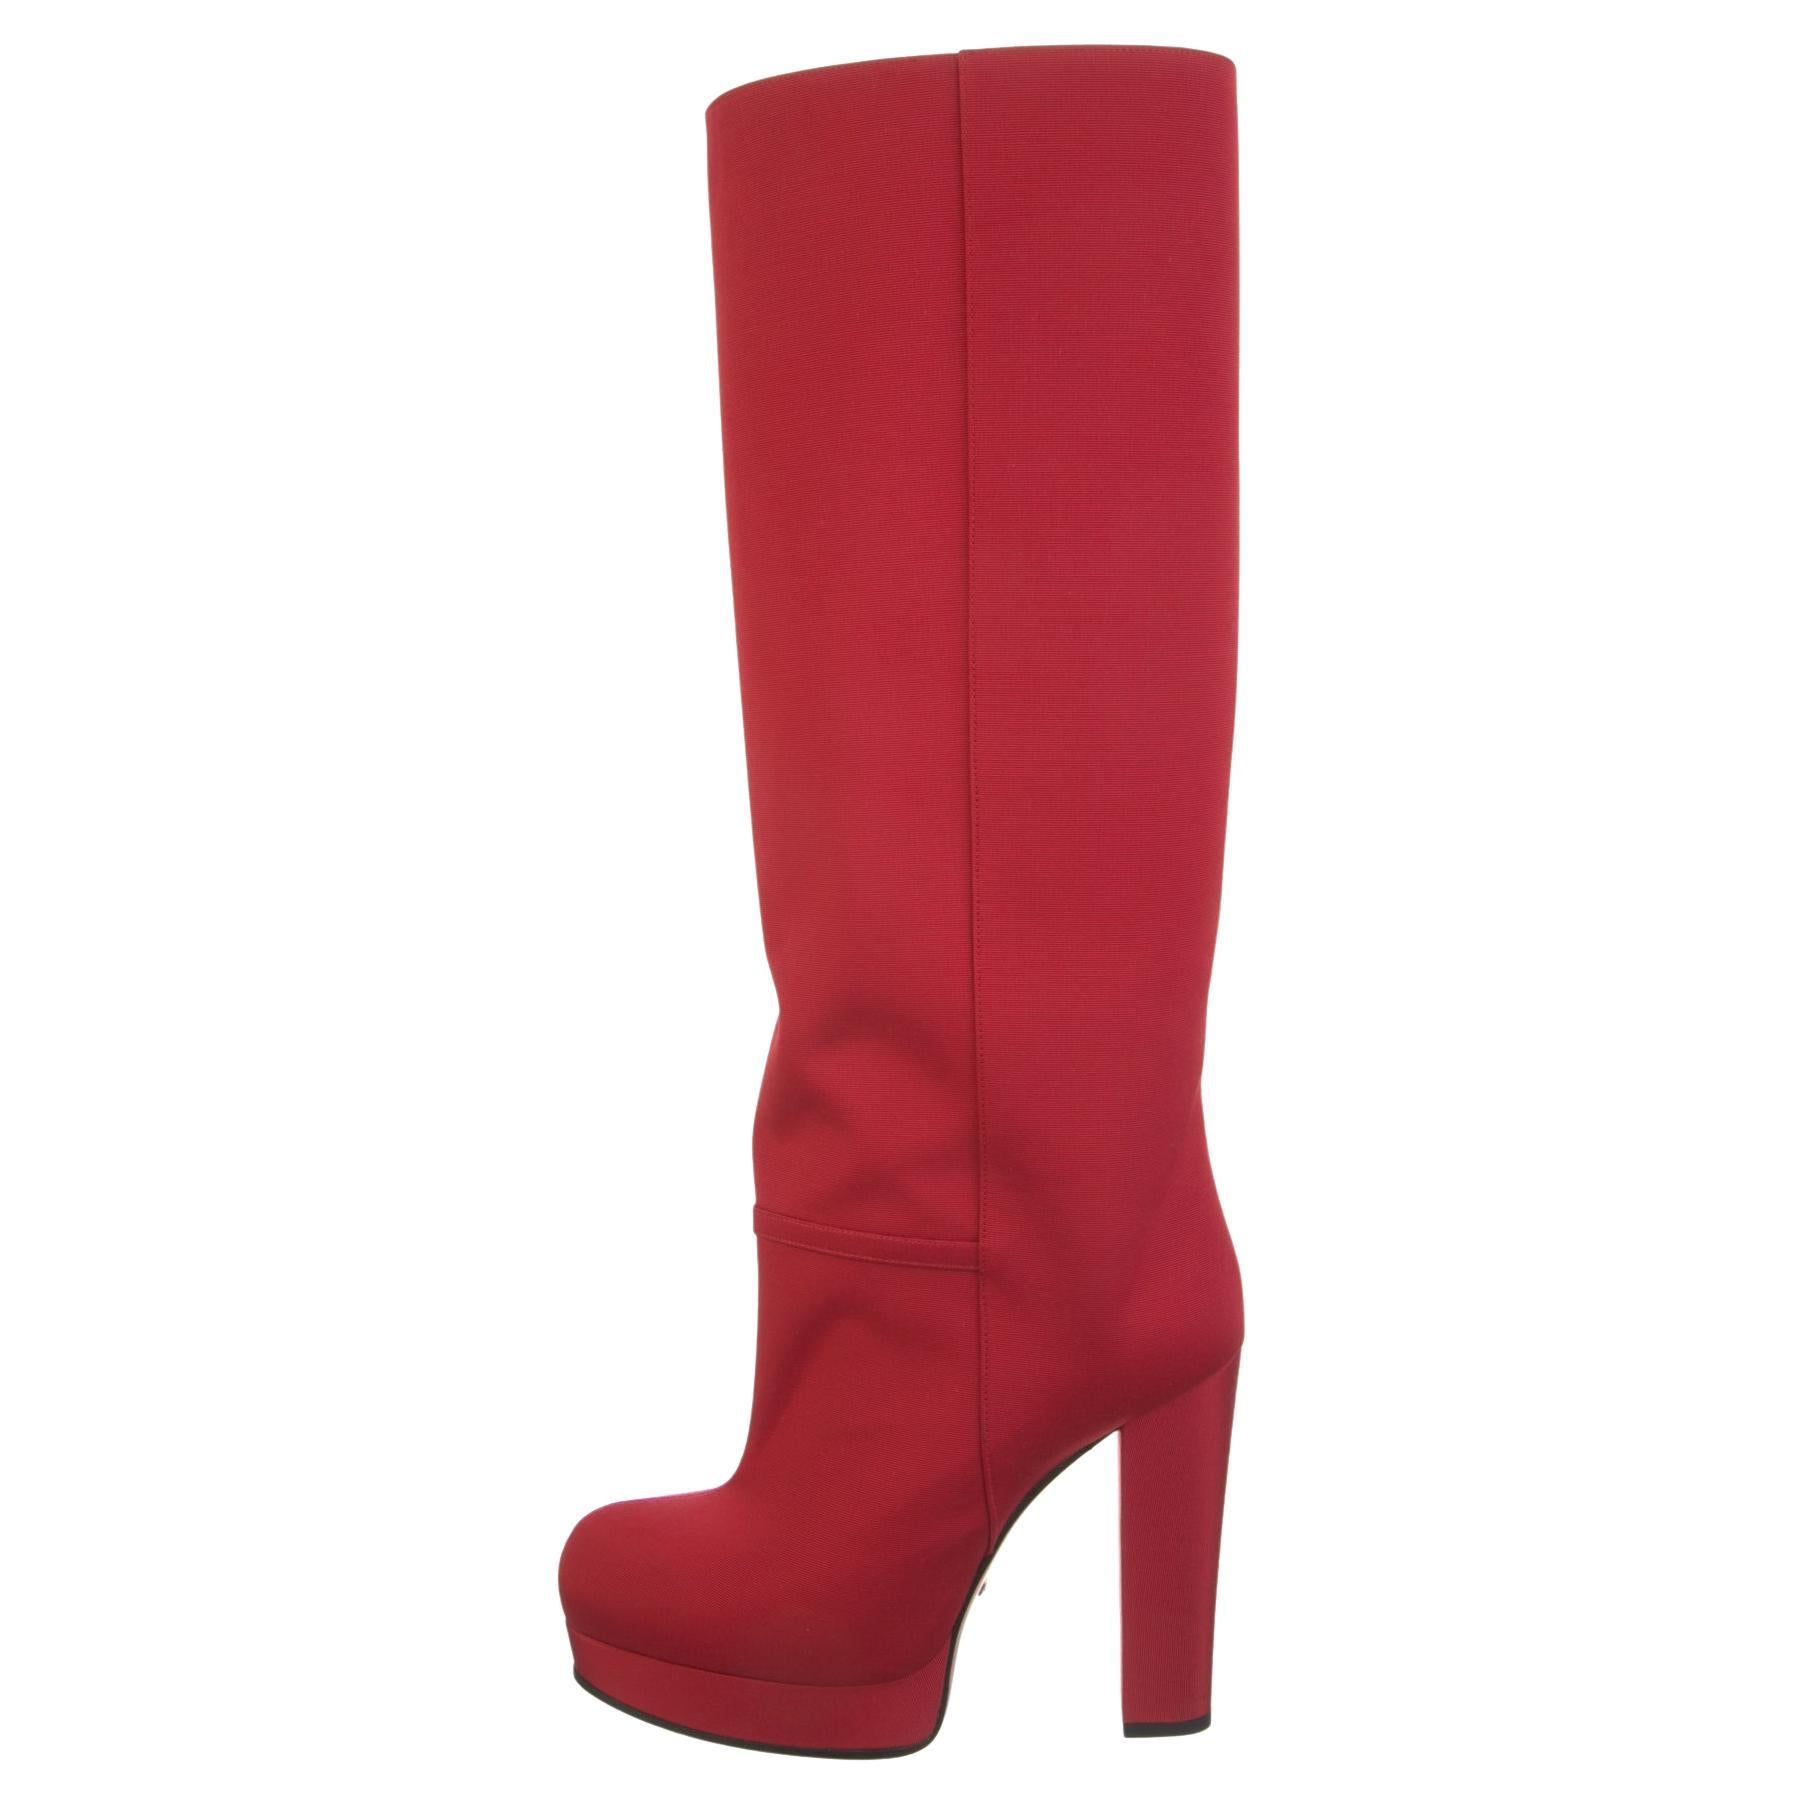 New With Box Gucci Fall 2019 Alessandro Michele Red Boots Sz 38 Neuf - En vente à Leesburg, VA